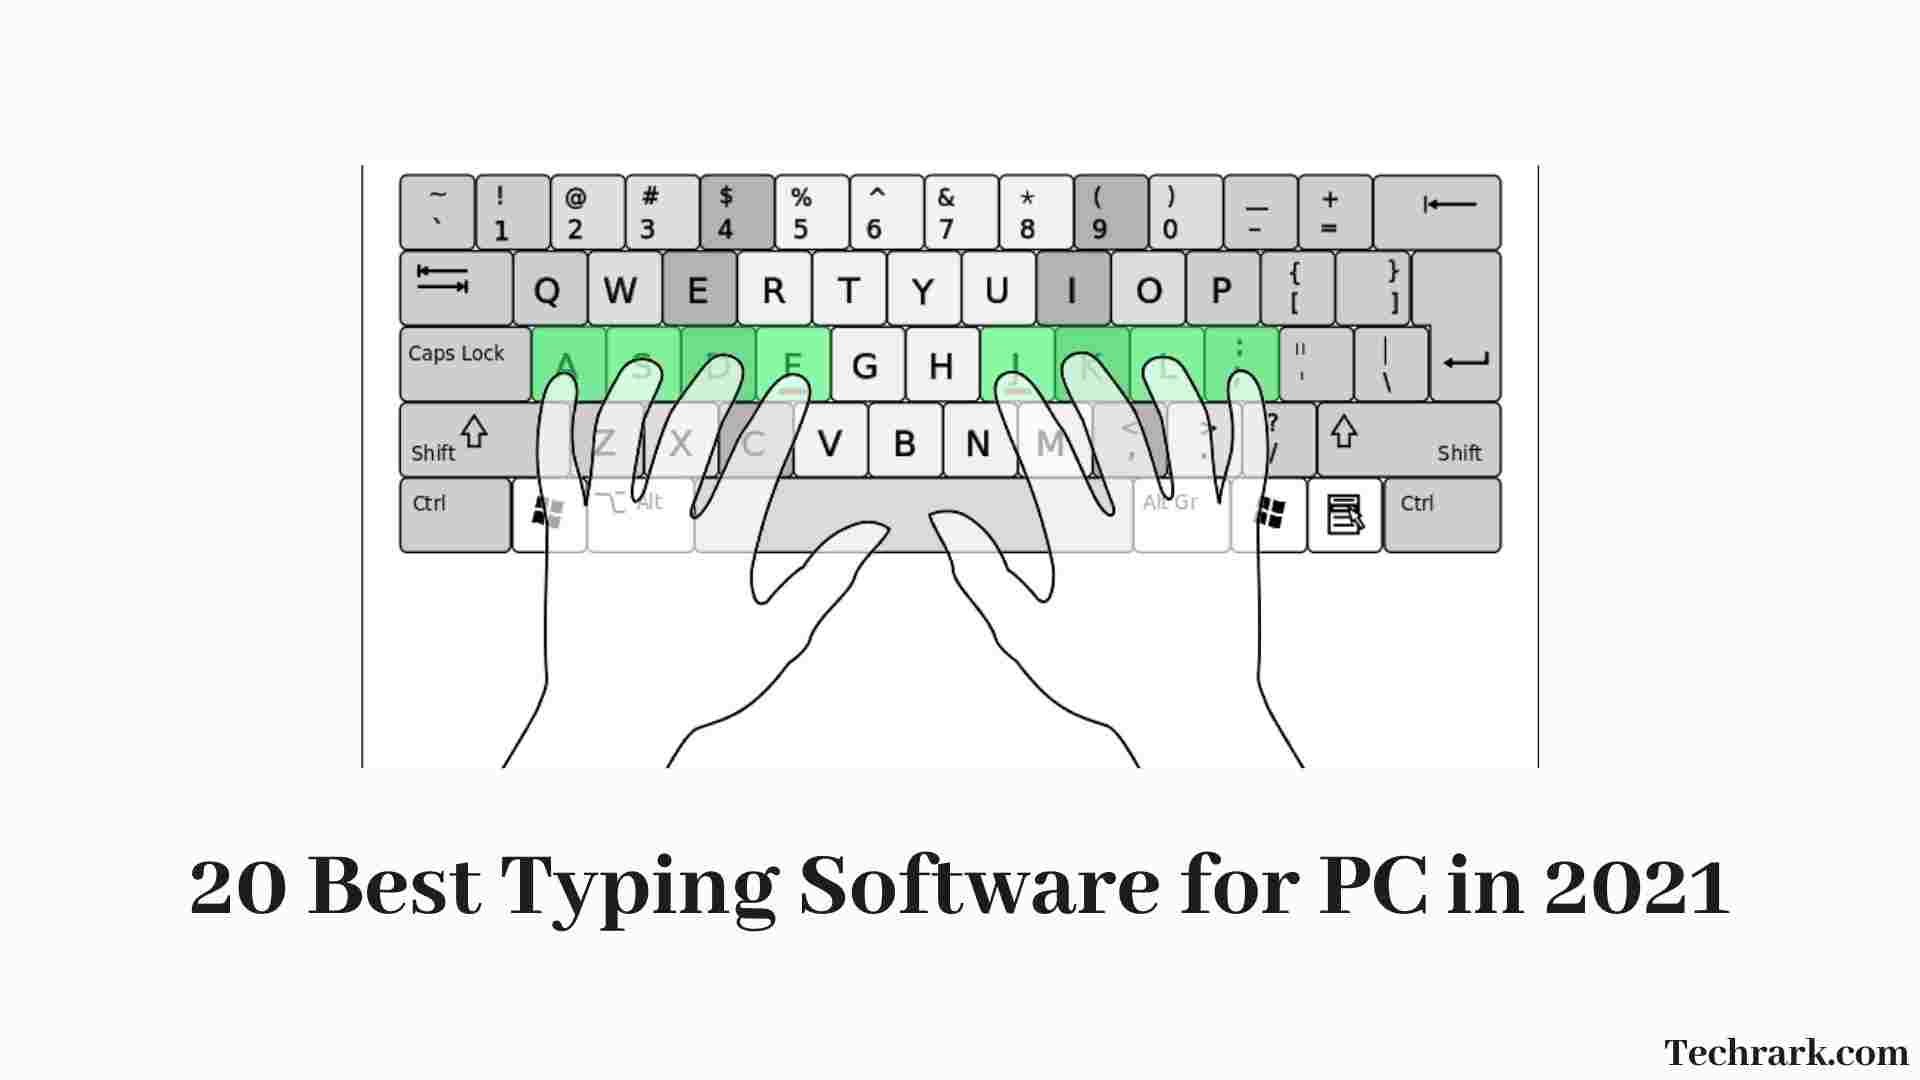 Typing Software for PC